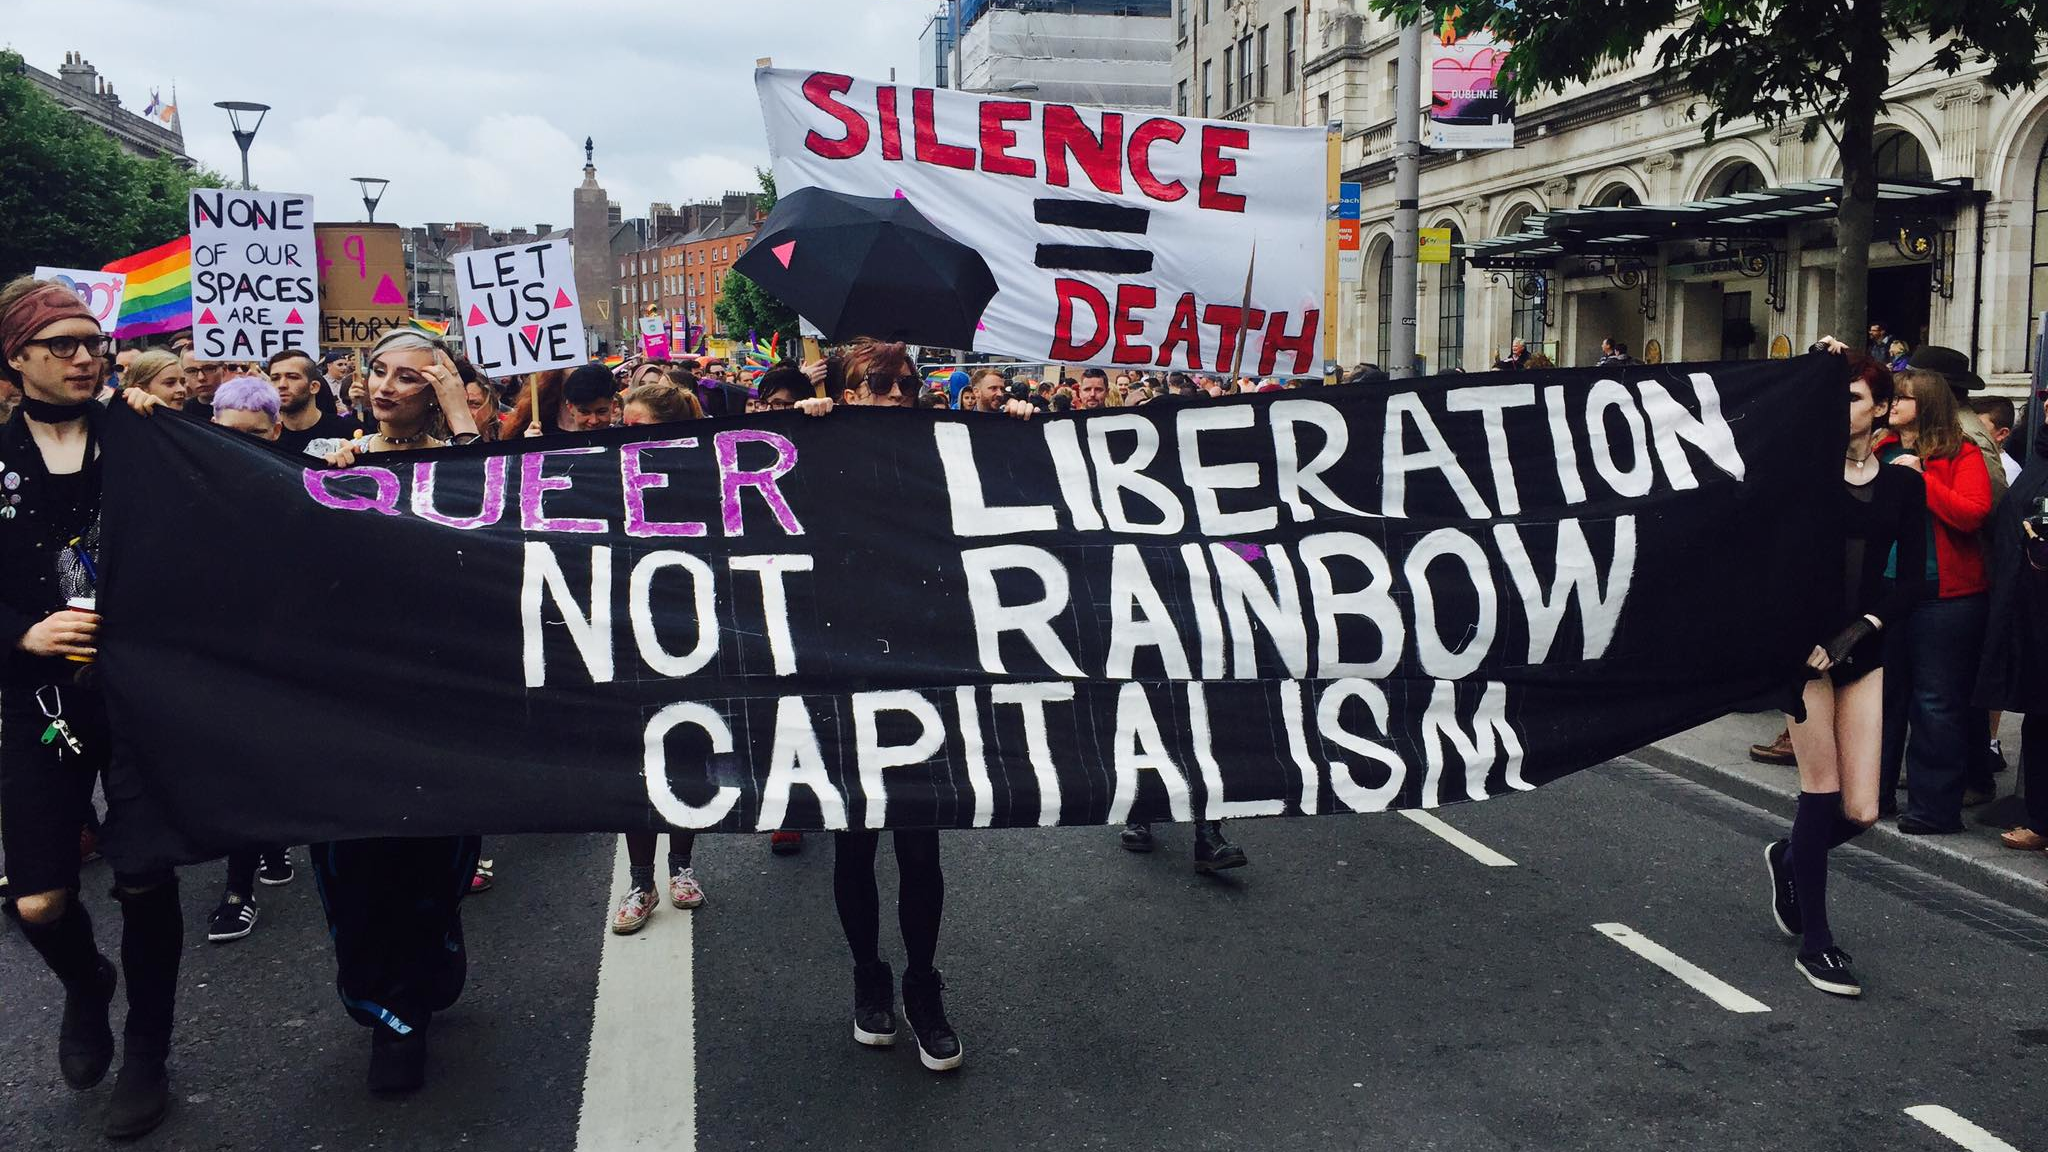 Queer Liberation, not Rainbow Capitalism